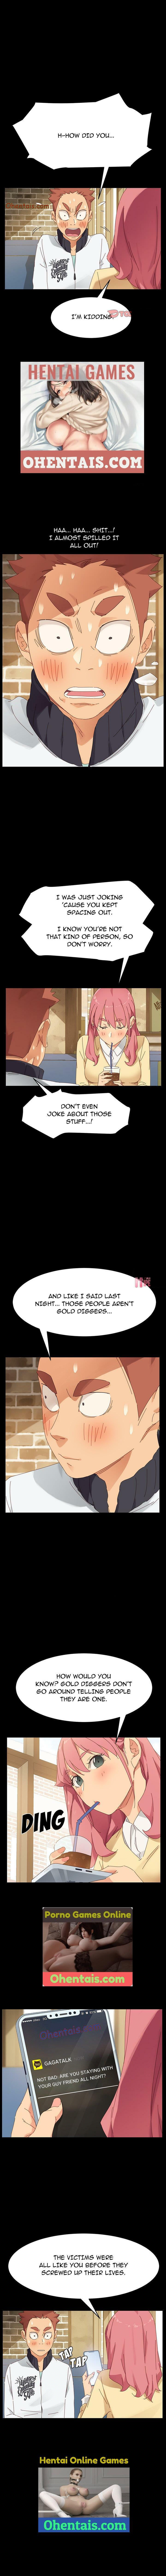 PERFECT ROOMMATES Ch. 6 6